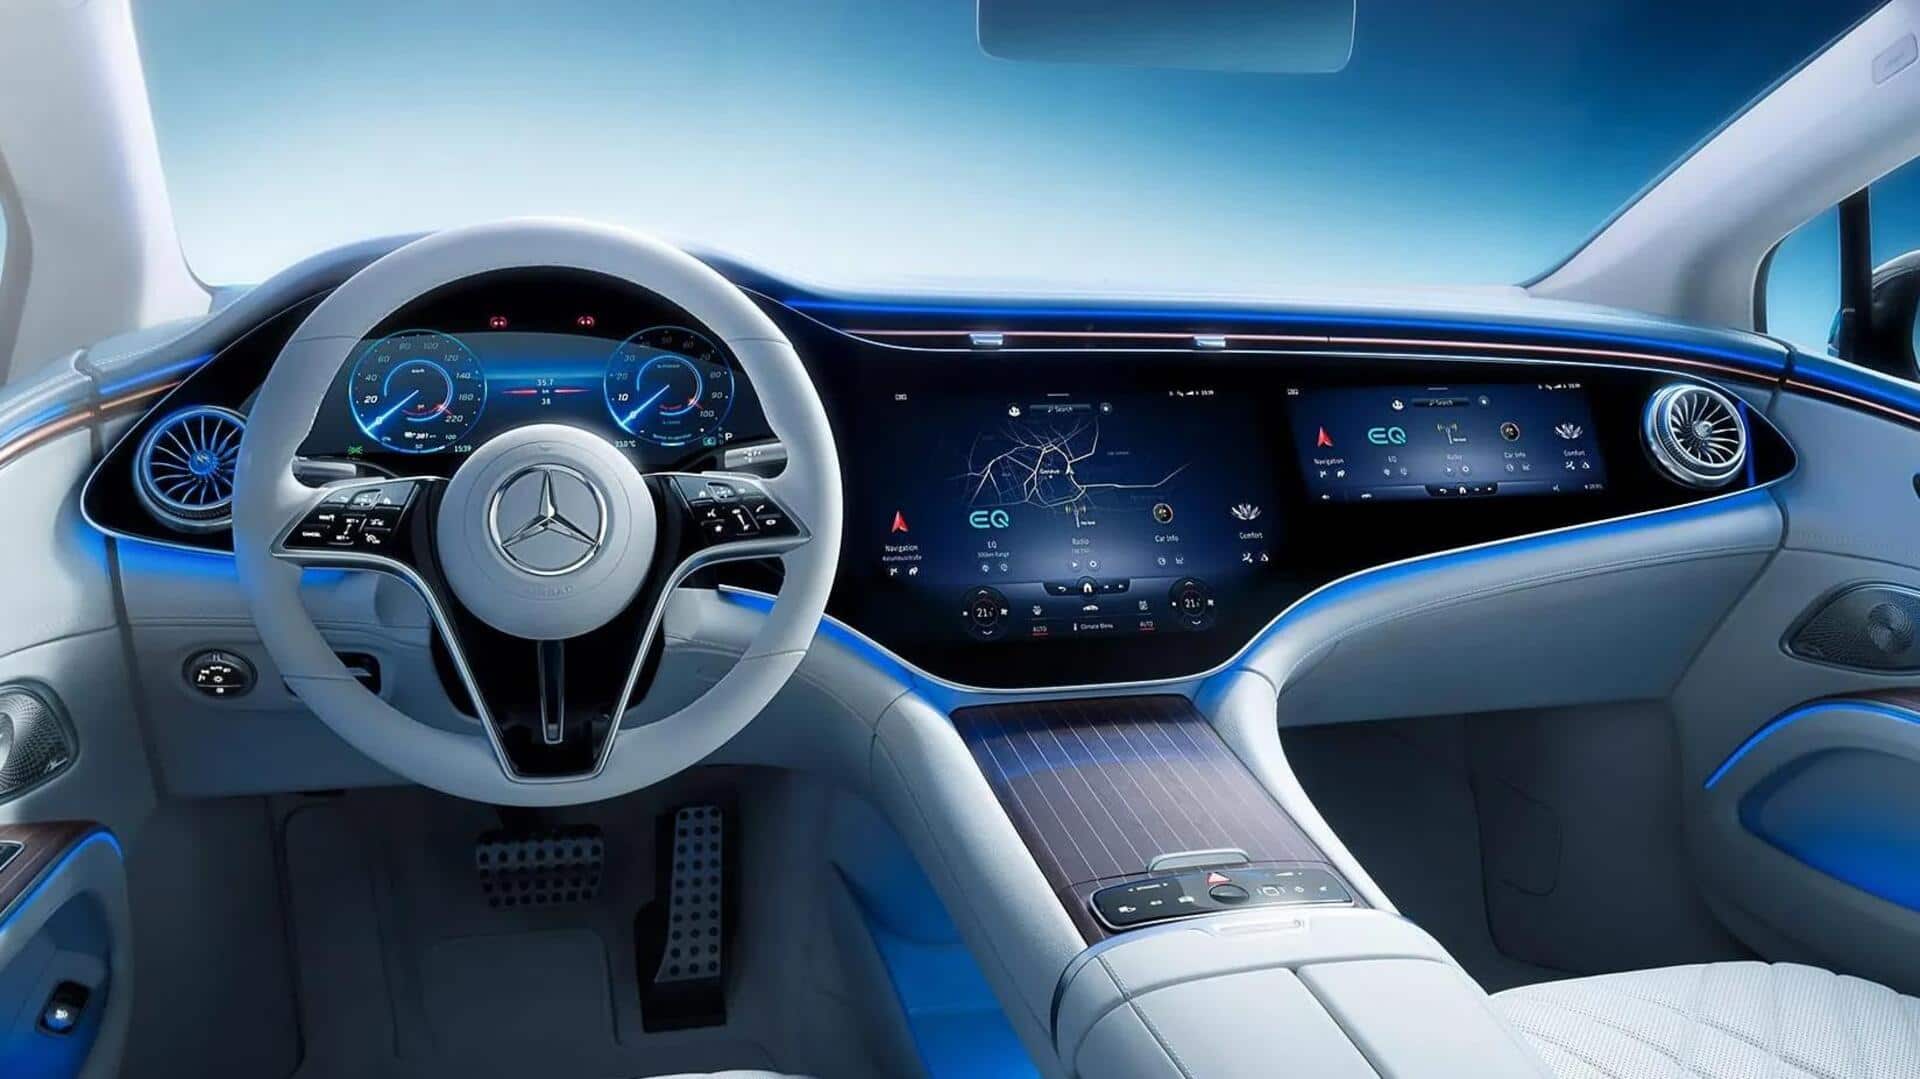 Control your smart devices from your Mercedes-Benz car: Here's how